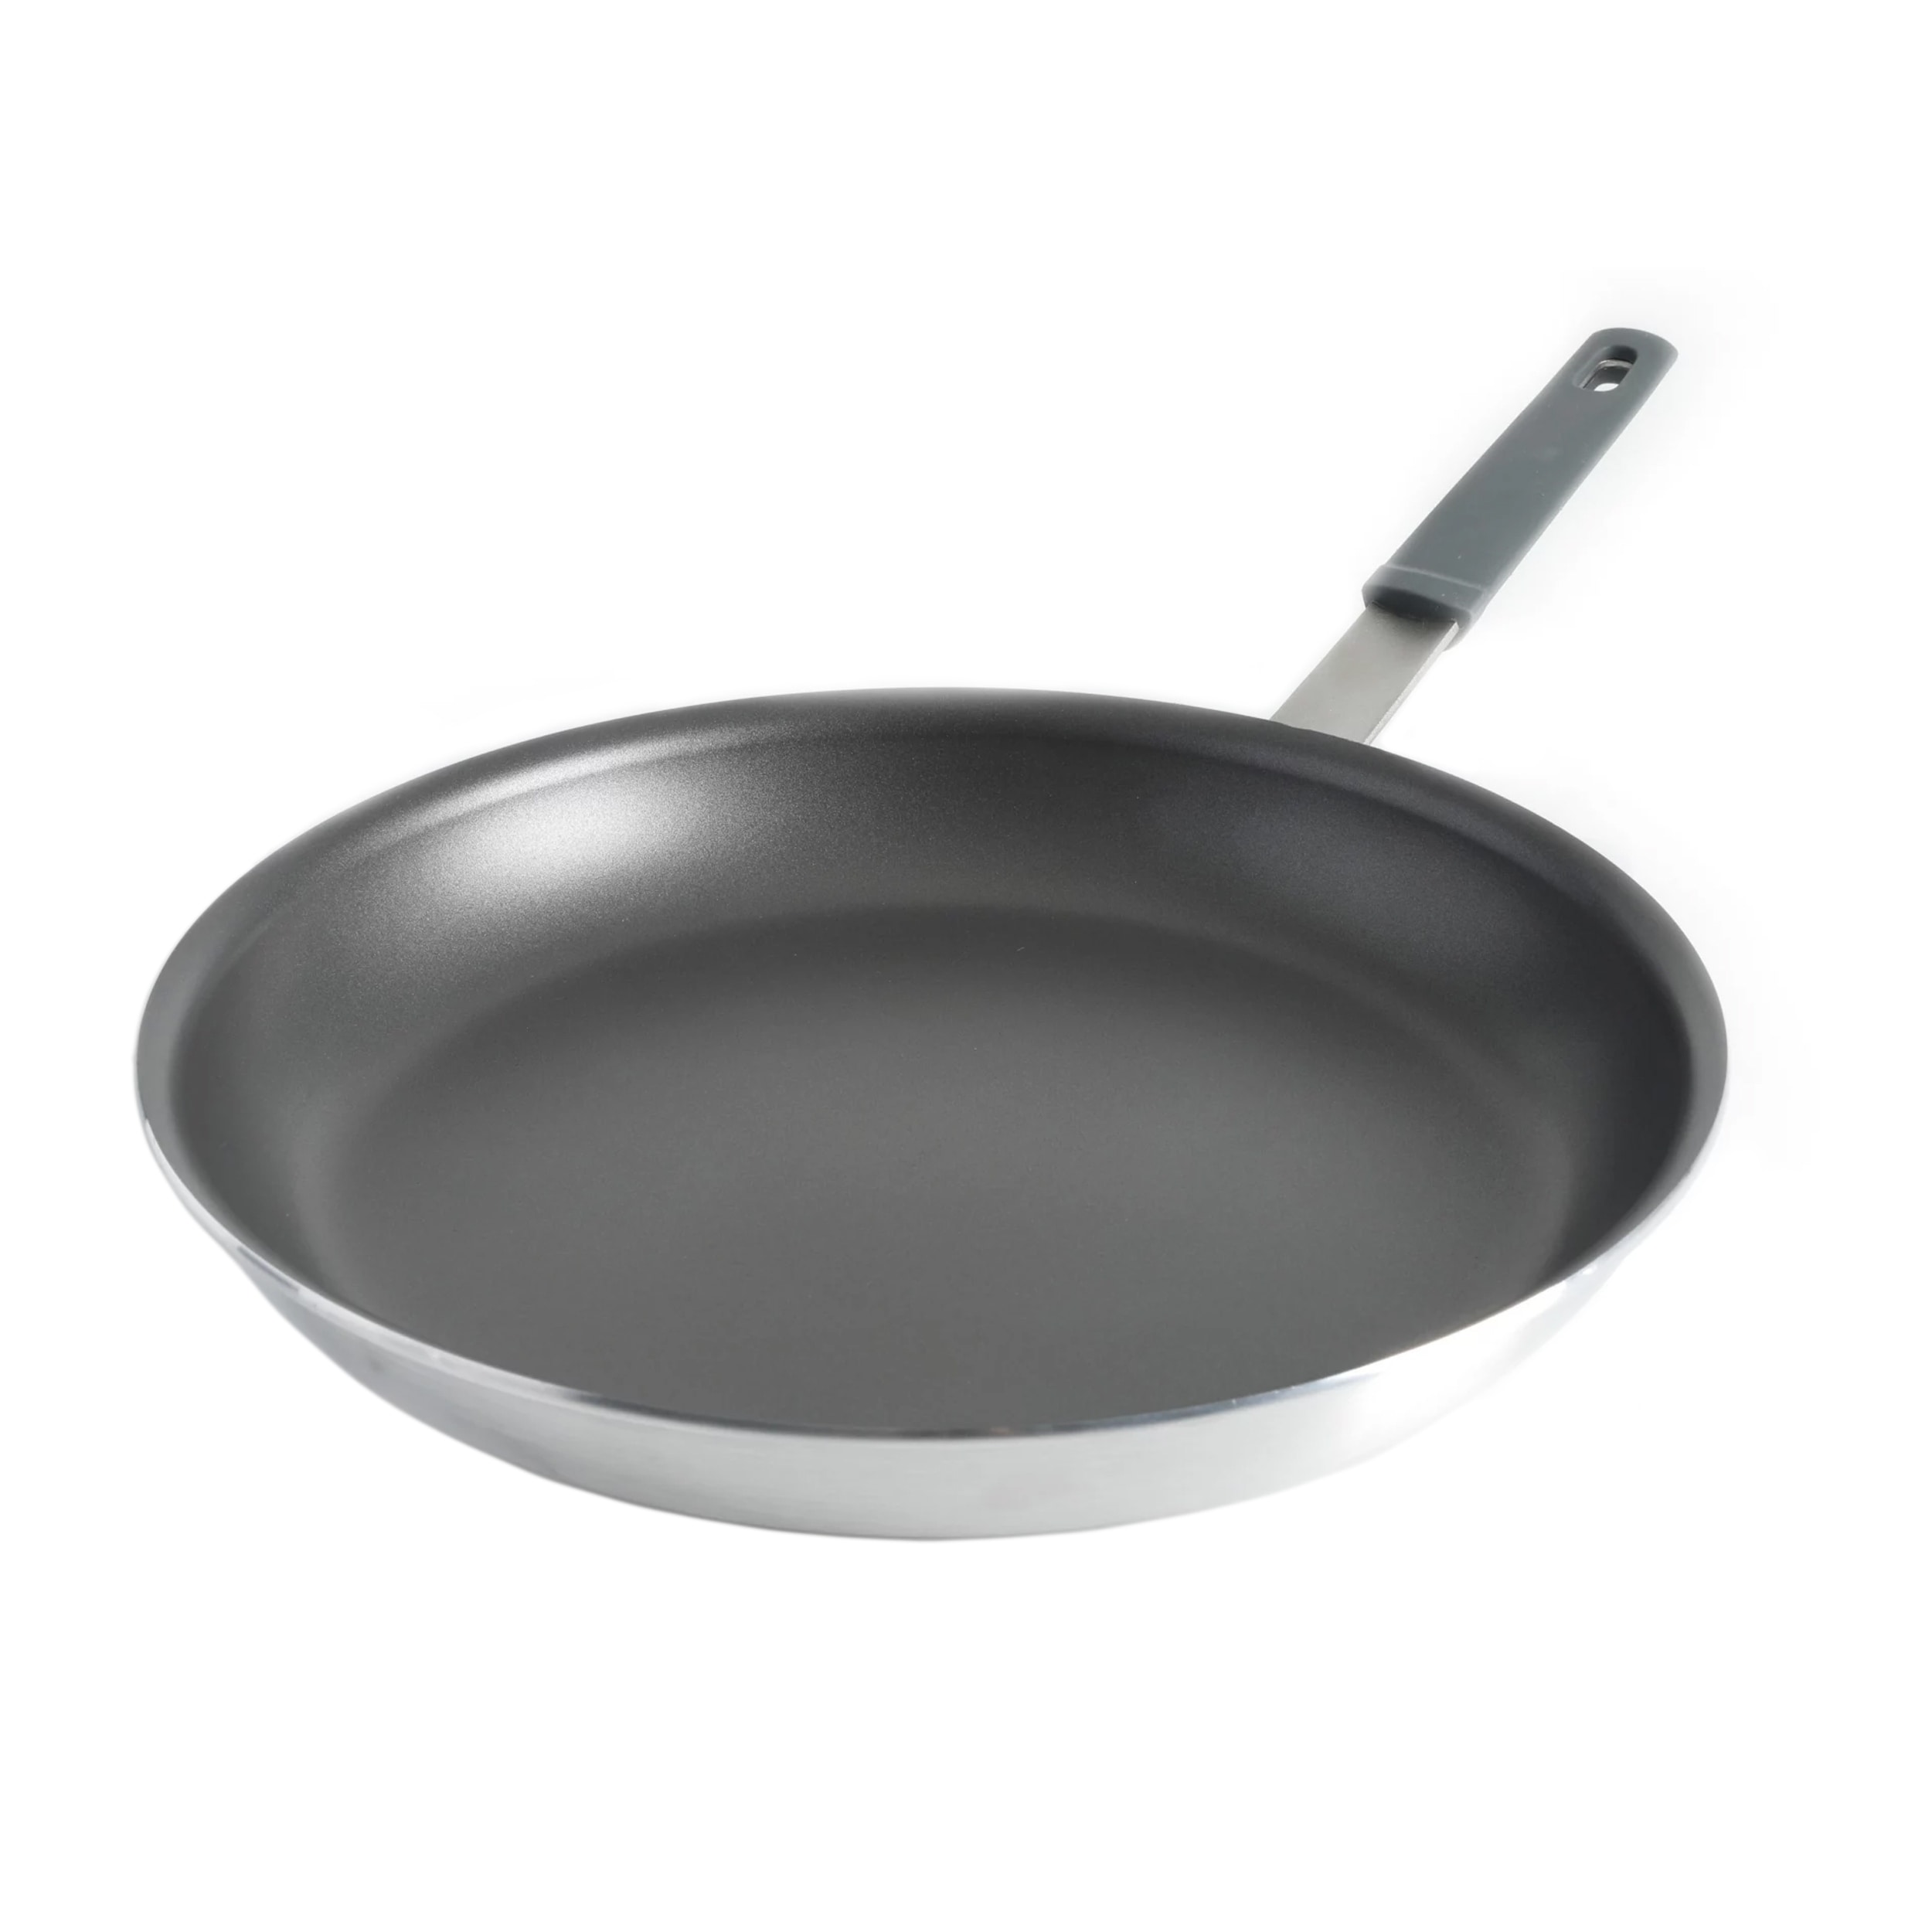 Cooks Standard 12-Inch Professional Aluminum Nonstick Restaurant Style Saute  Fry Pan, 12 INCH - Food 4 Less